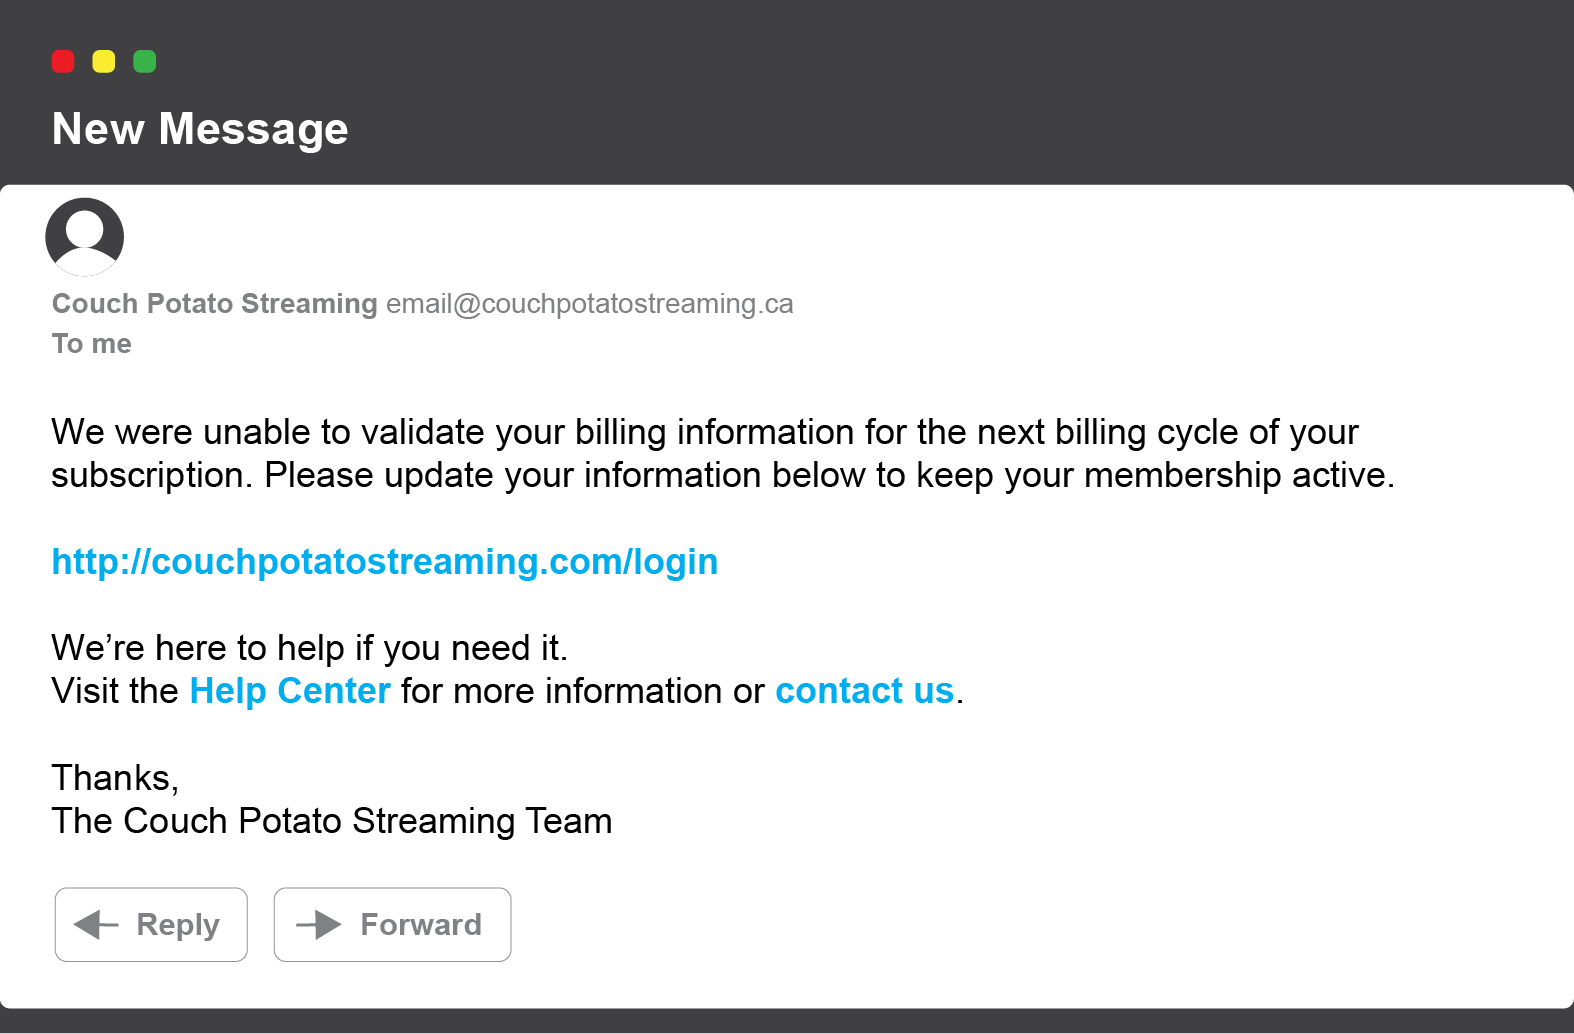 New message: We were unable to validate your billing information for the next billing cycle of your subscription. Please update your information below to keep your membership active. http://couchpotatostreaming.com/login We’re here to help if you need it. Visit the Help Center for more information or contact us. Thanks, The Couch Potato Streaming Team